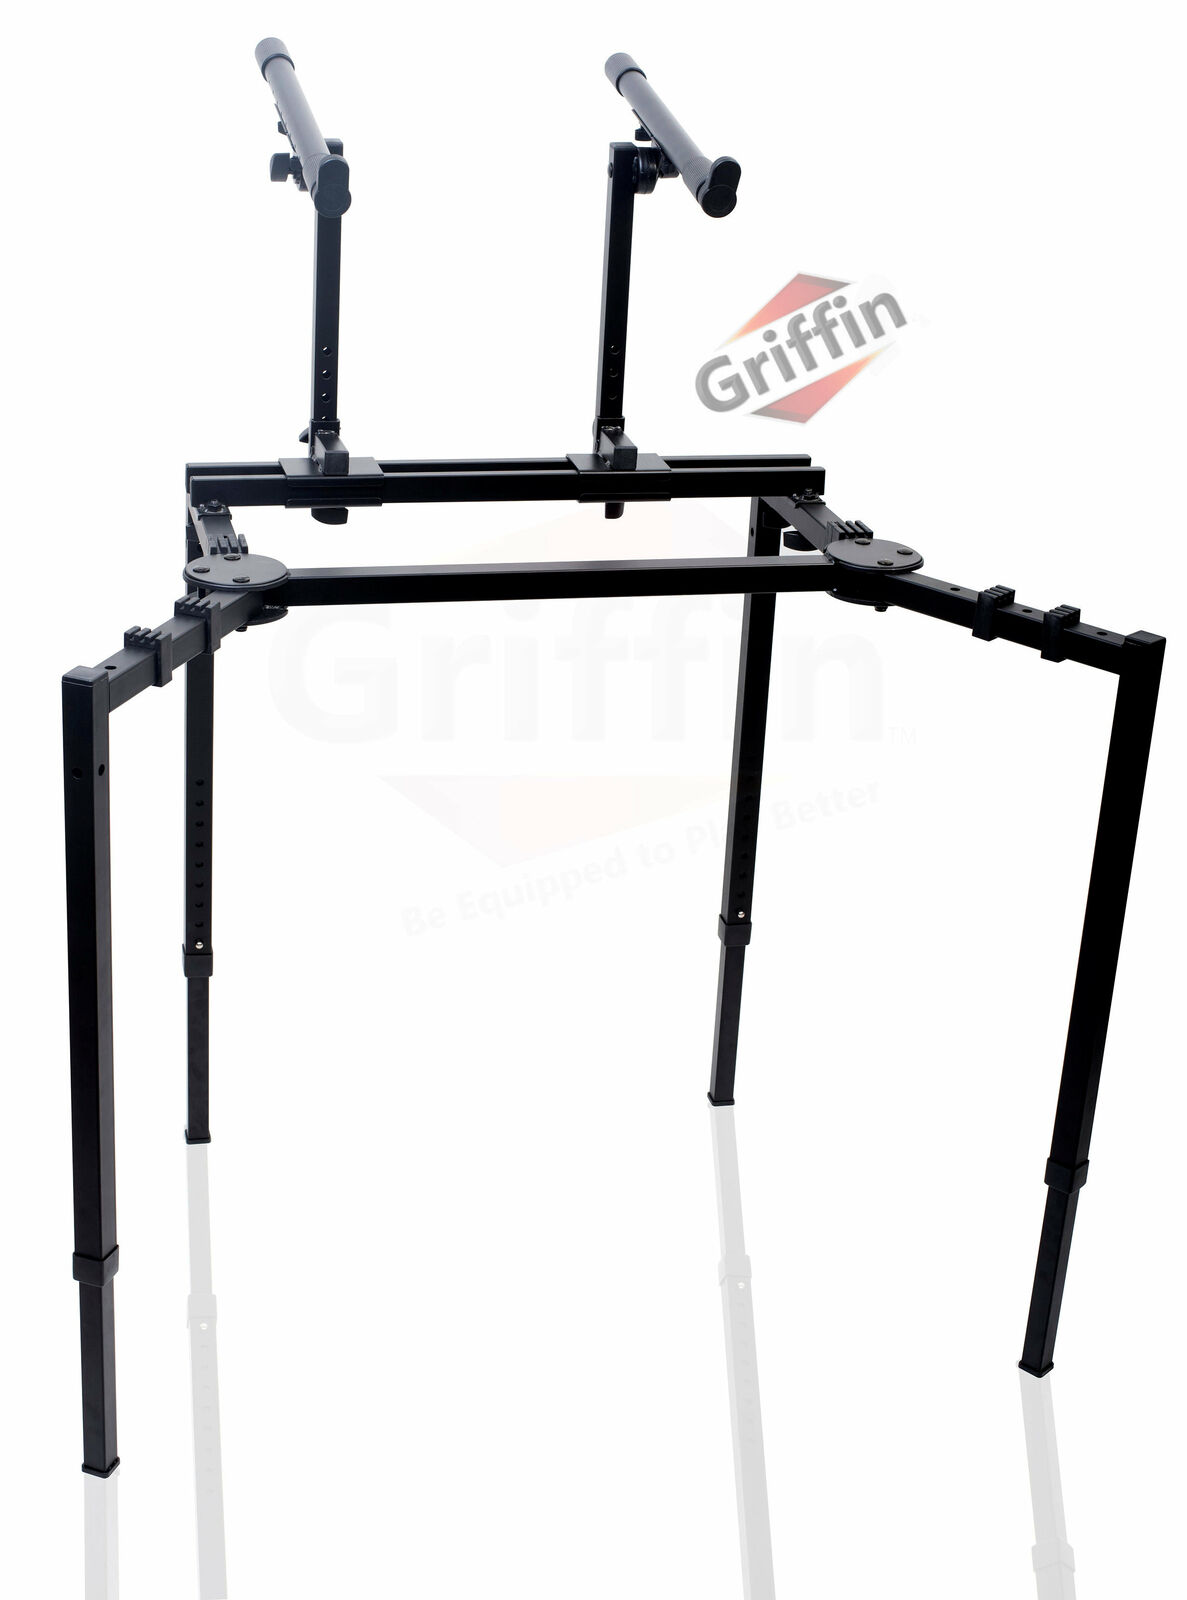 Double Piano Keyboard Stand - 2Tier Studio Stage Mixer Laptop Mount DJ Turntable